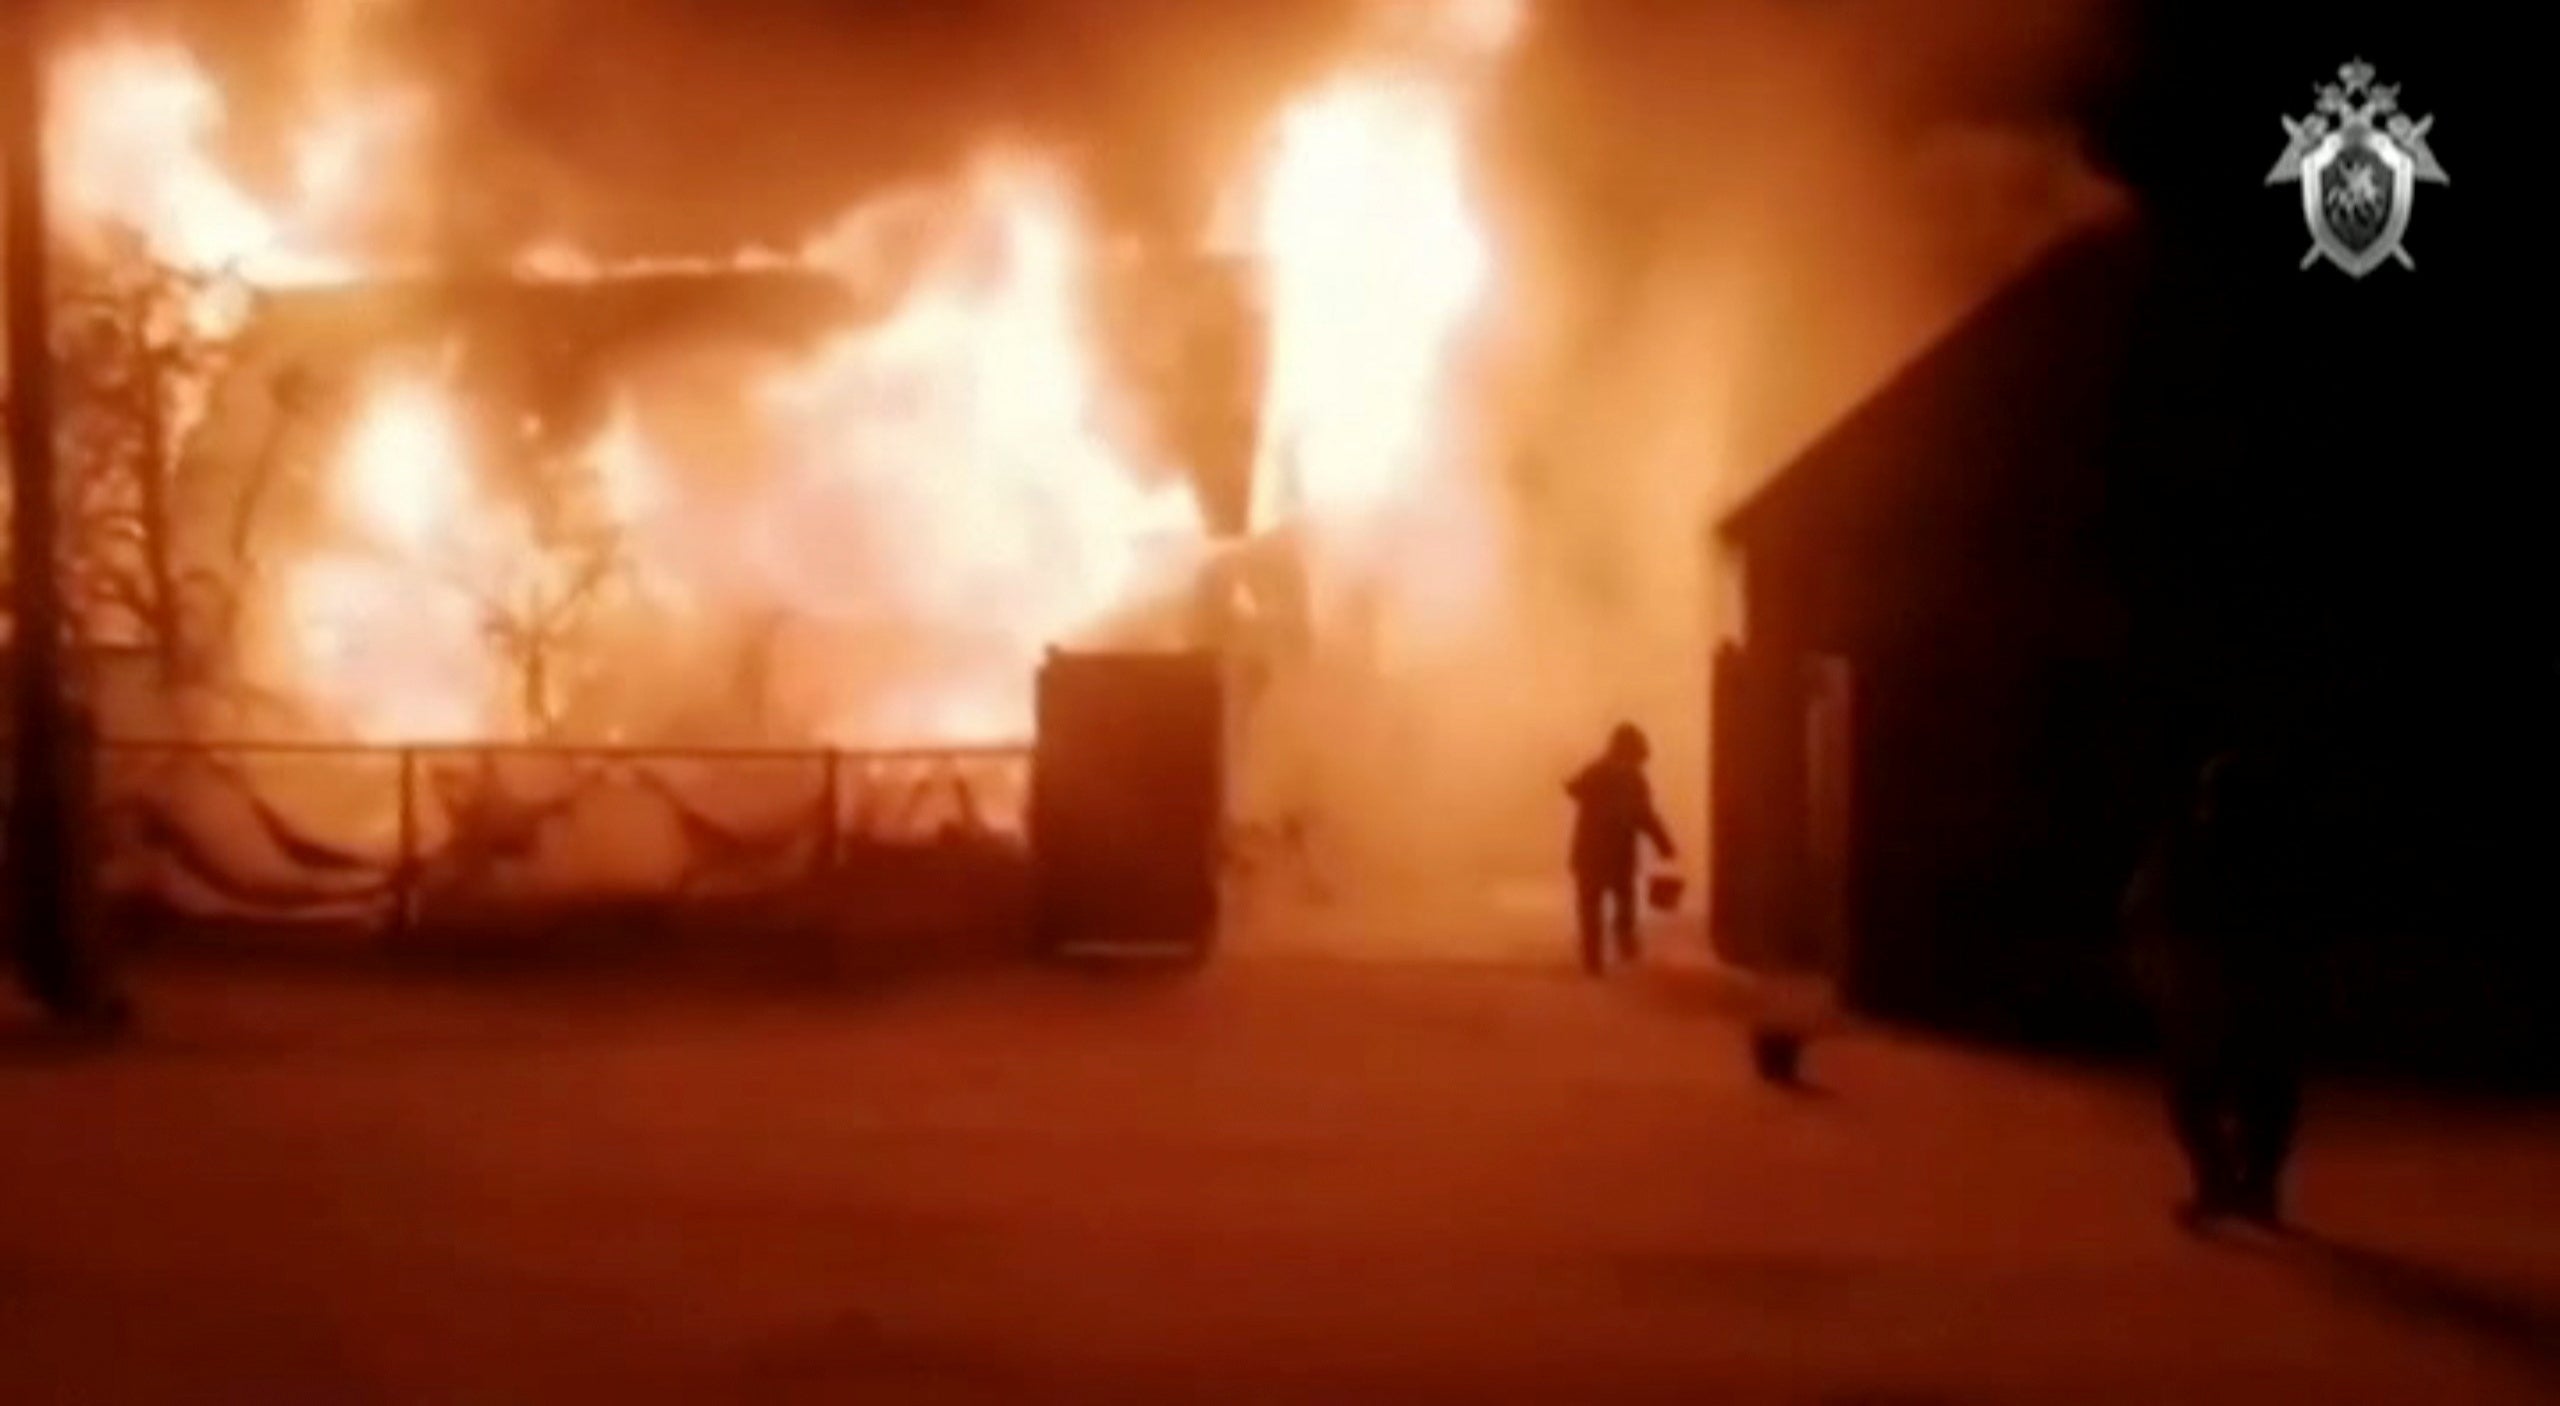 The picture shows a retirement home on fire in Ishbuldino village in the region of Bashkortostan